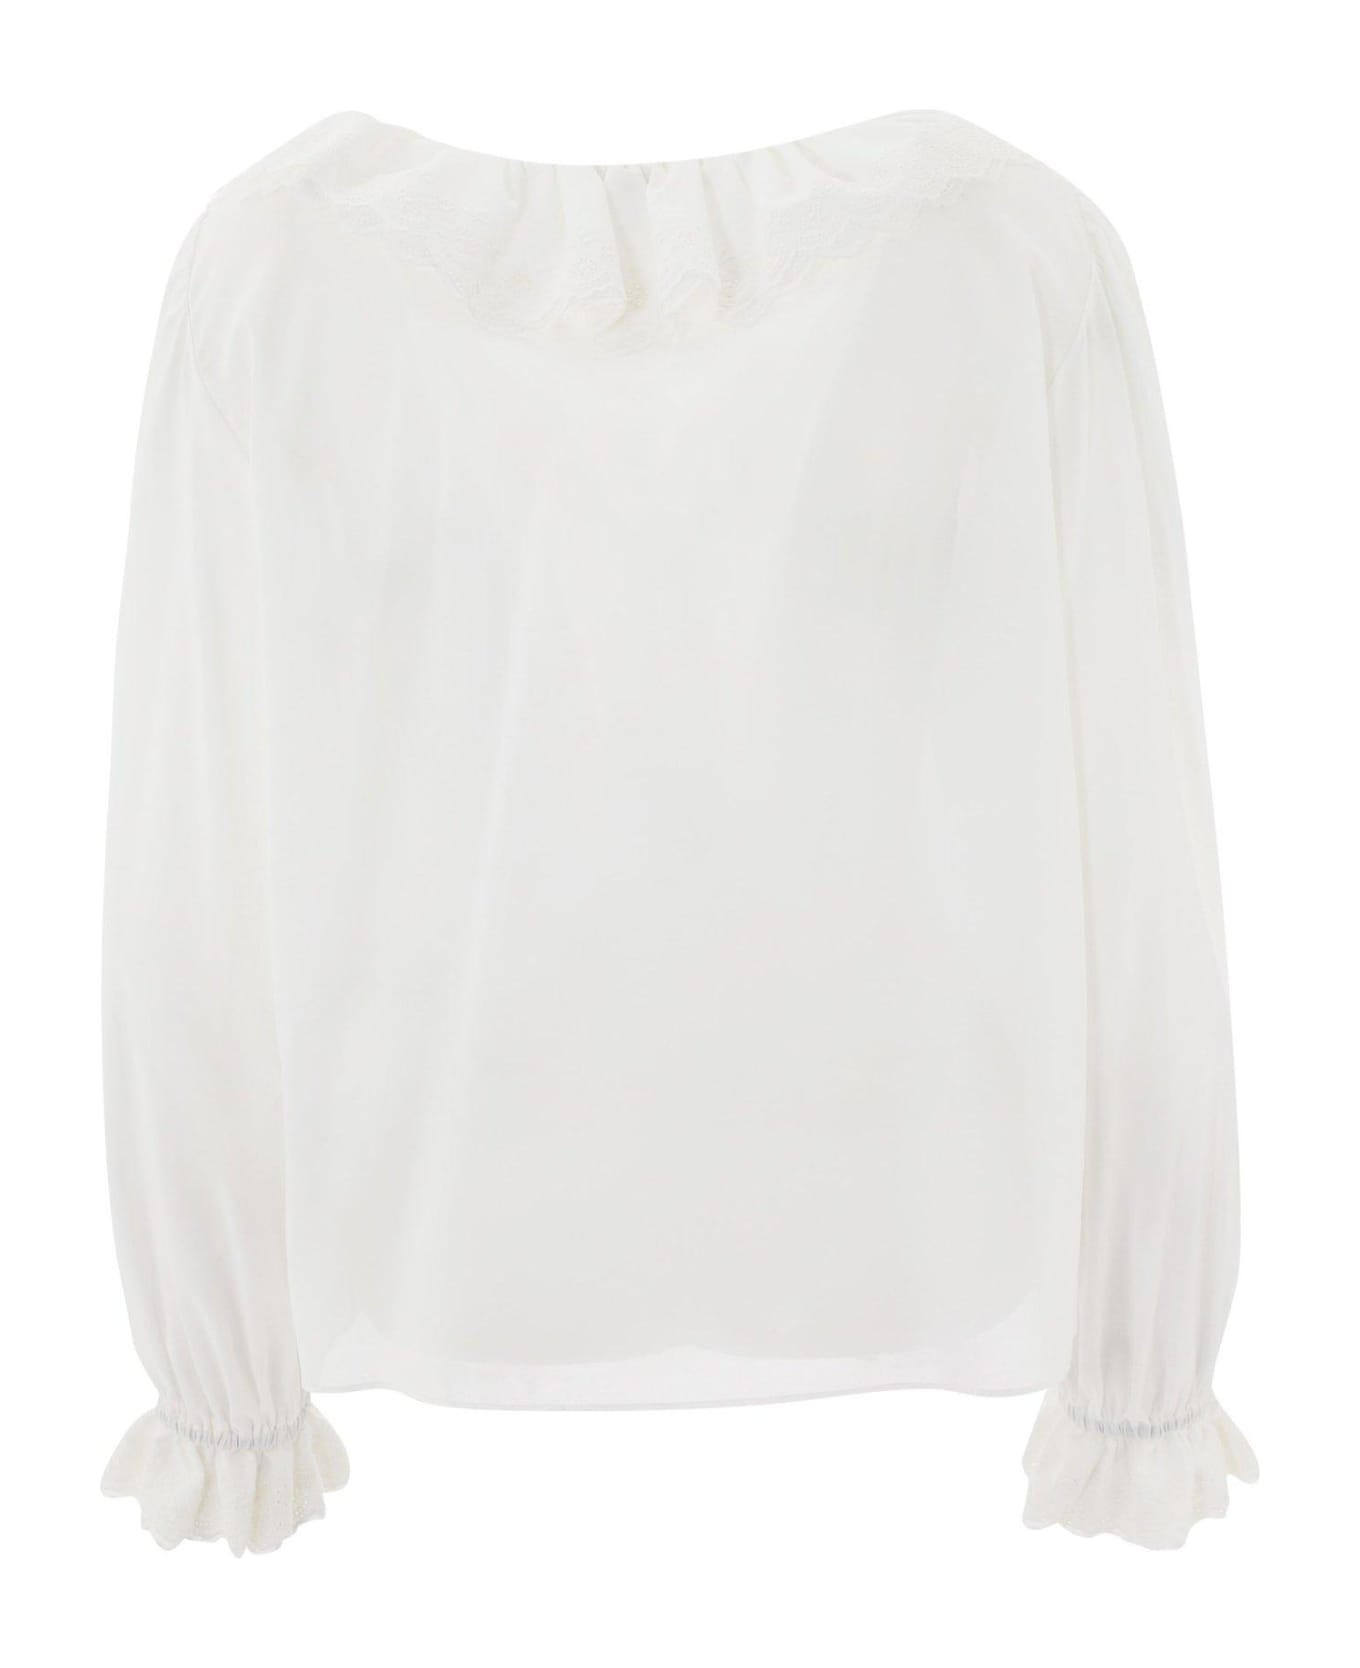 Saint Laurent Broderie Anglaise Frilled Tie Blouse - White ブラウス